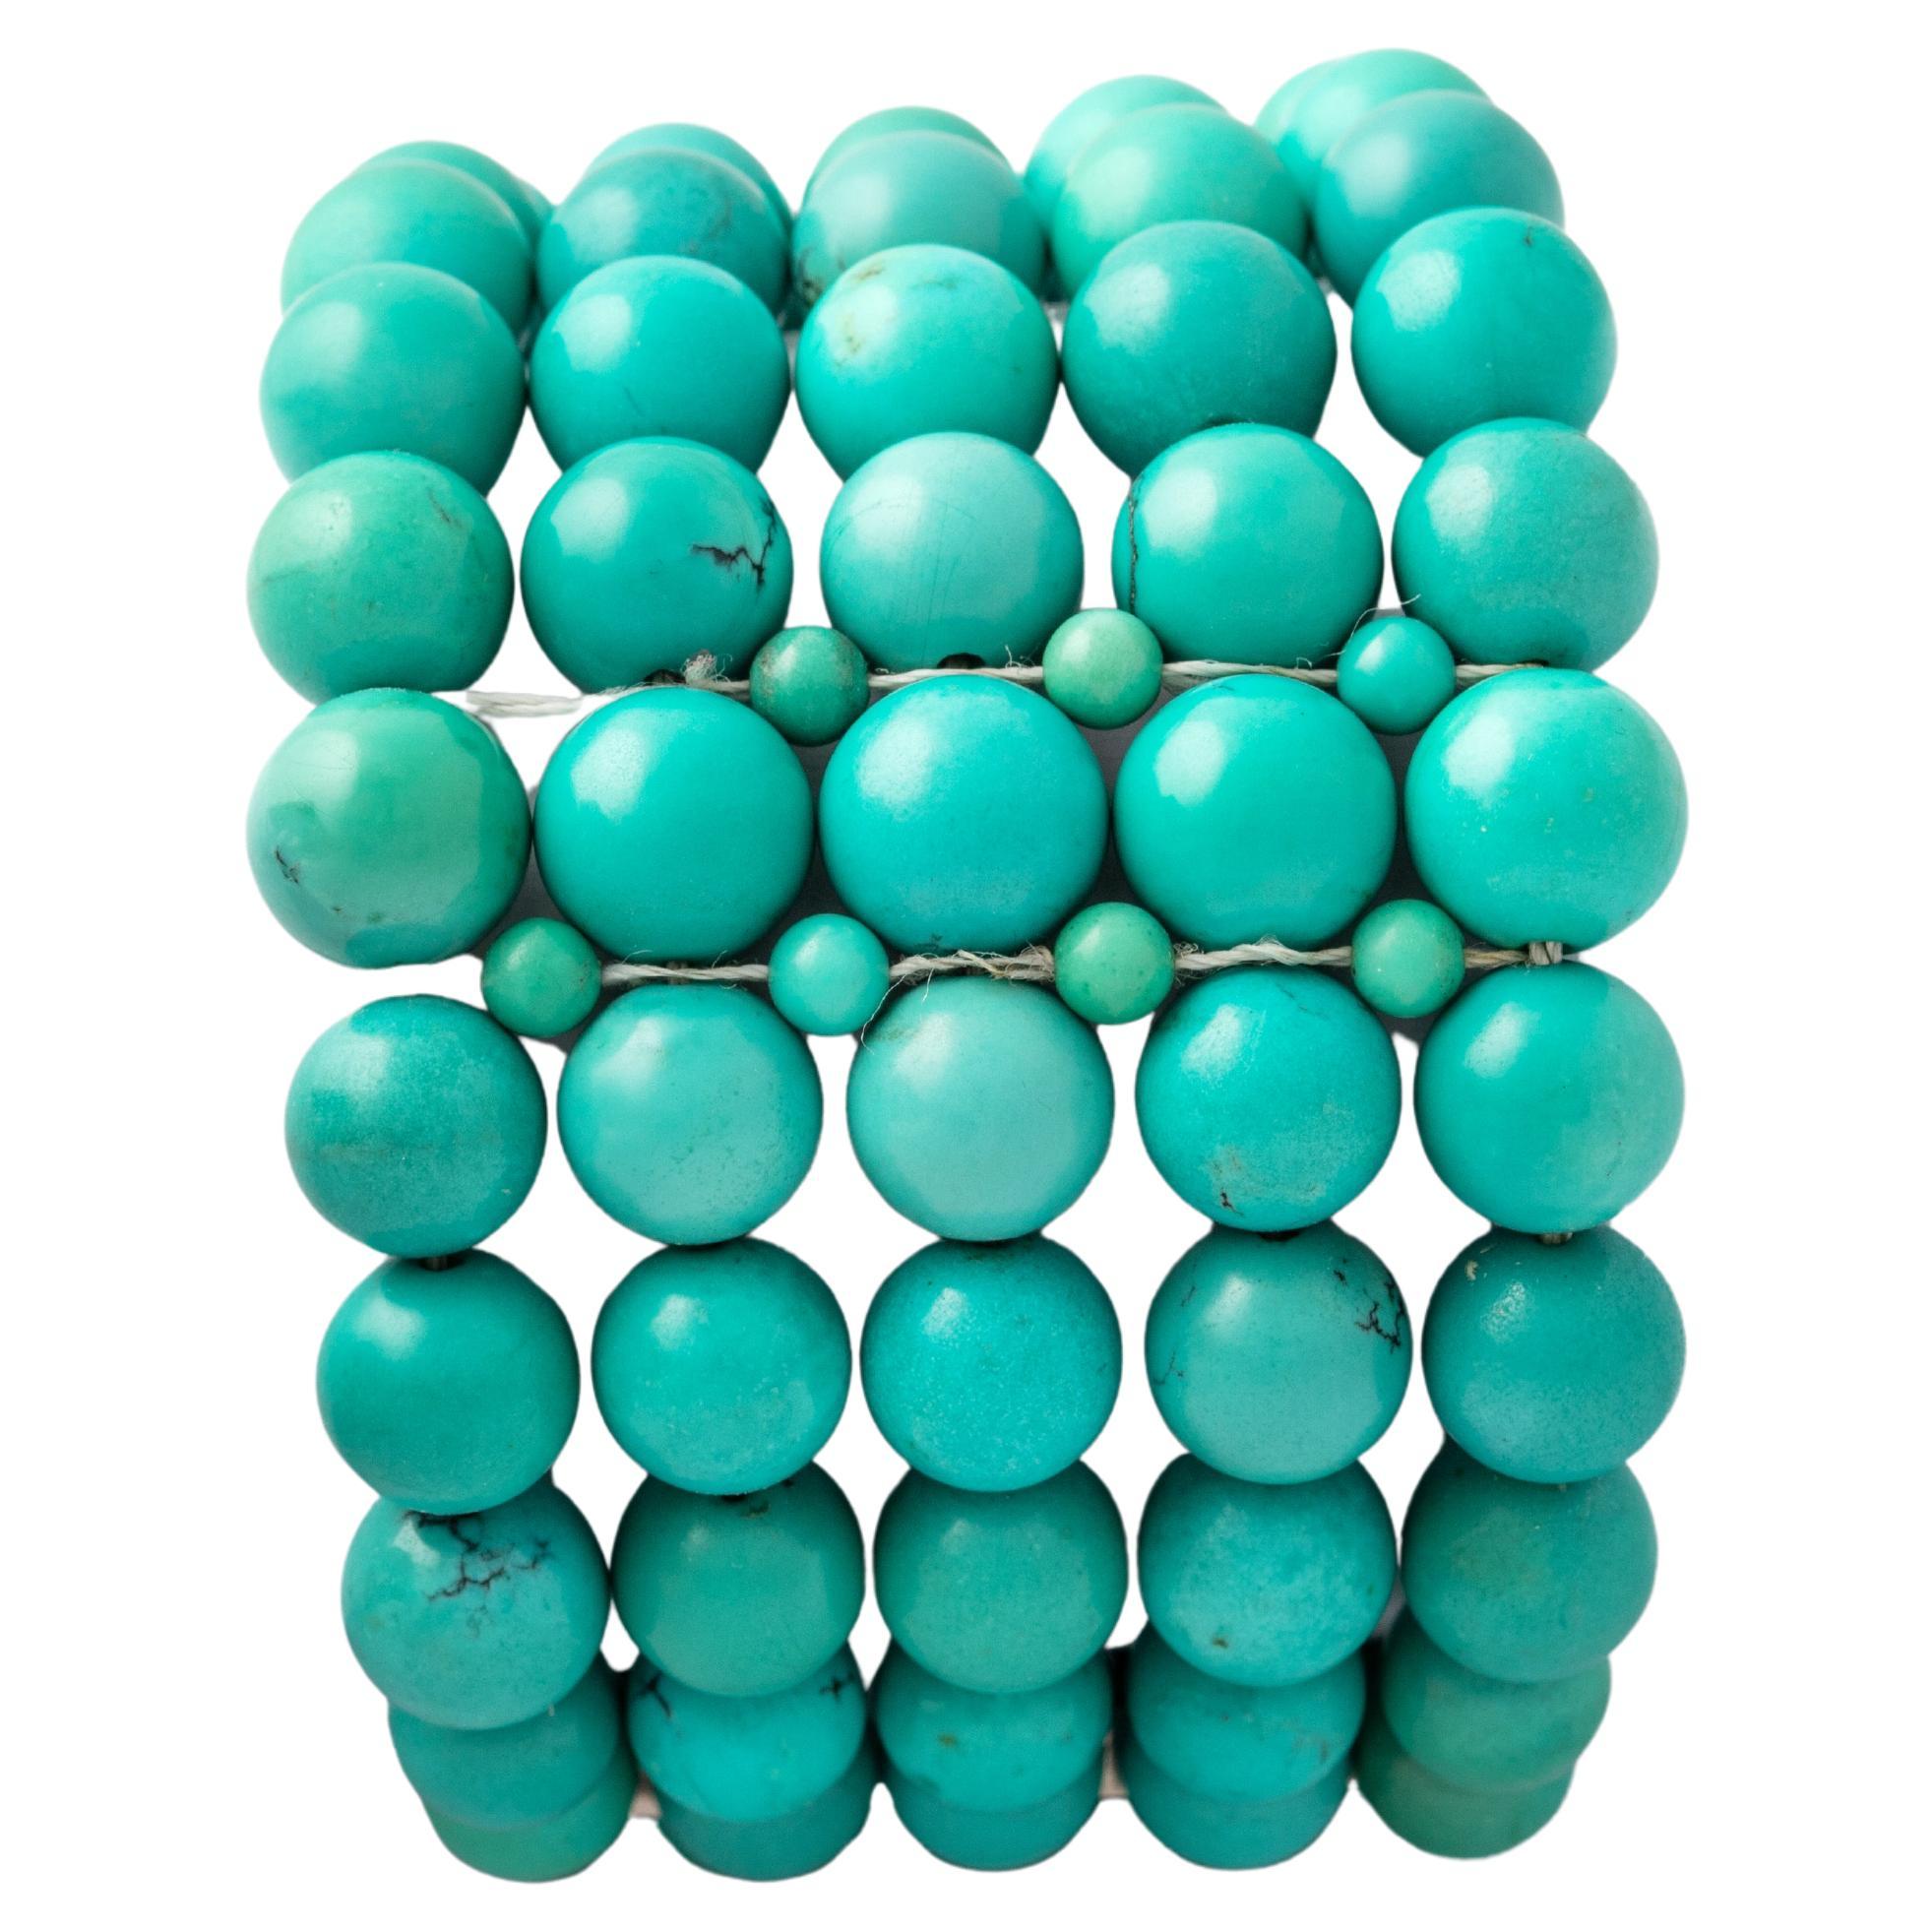 Bead Natural Turquoise Bracelet For Sale